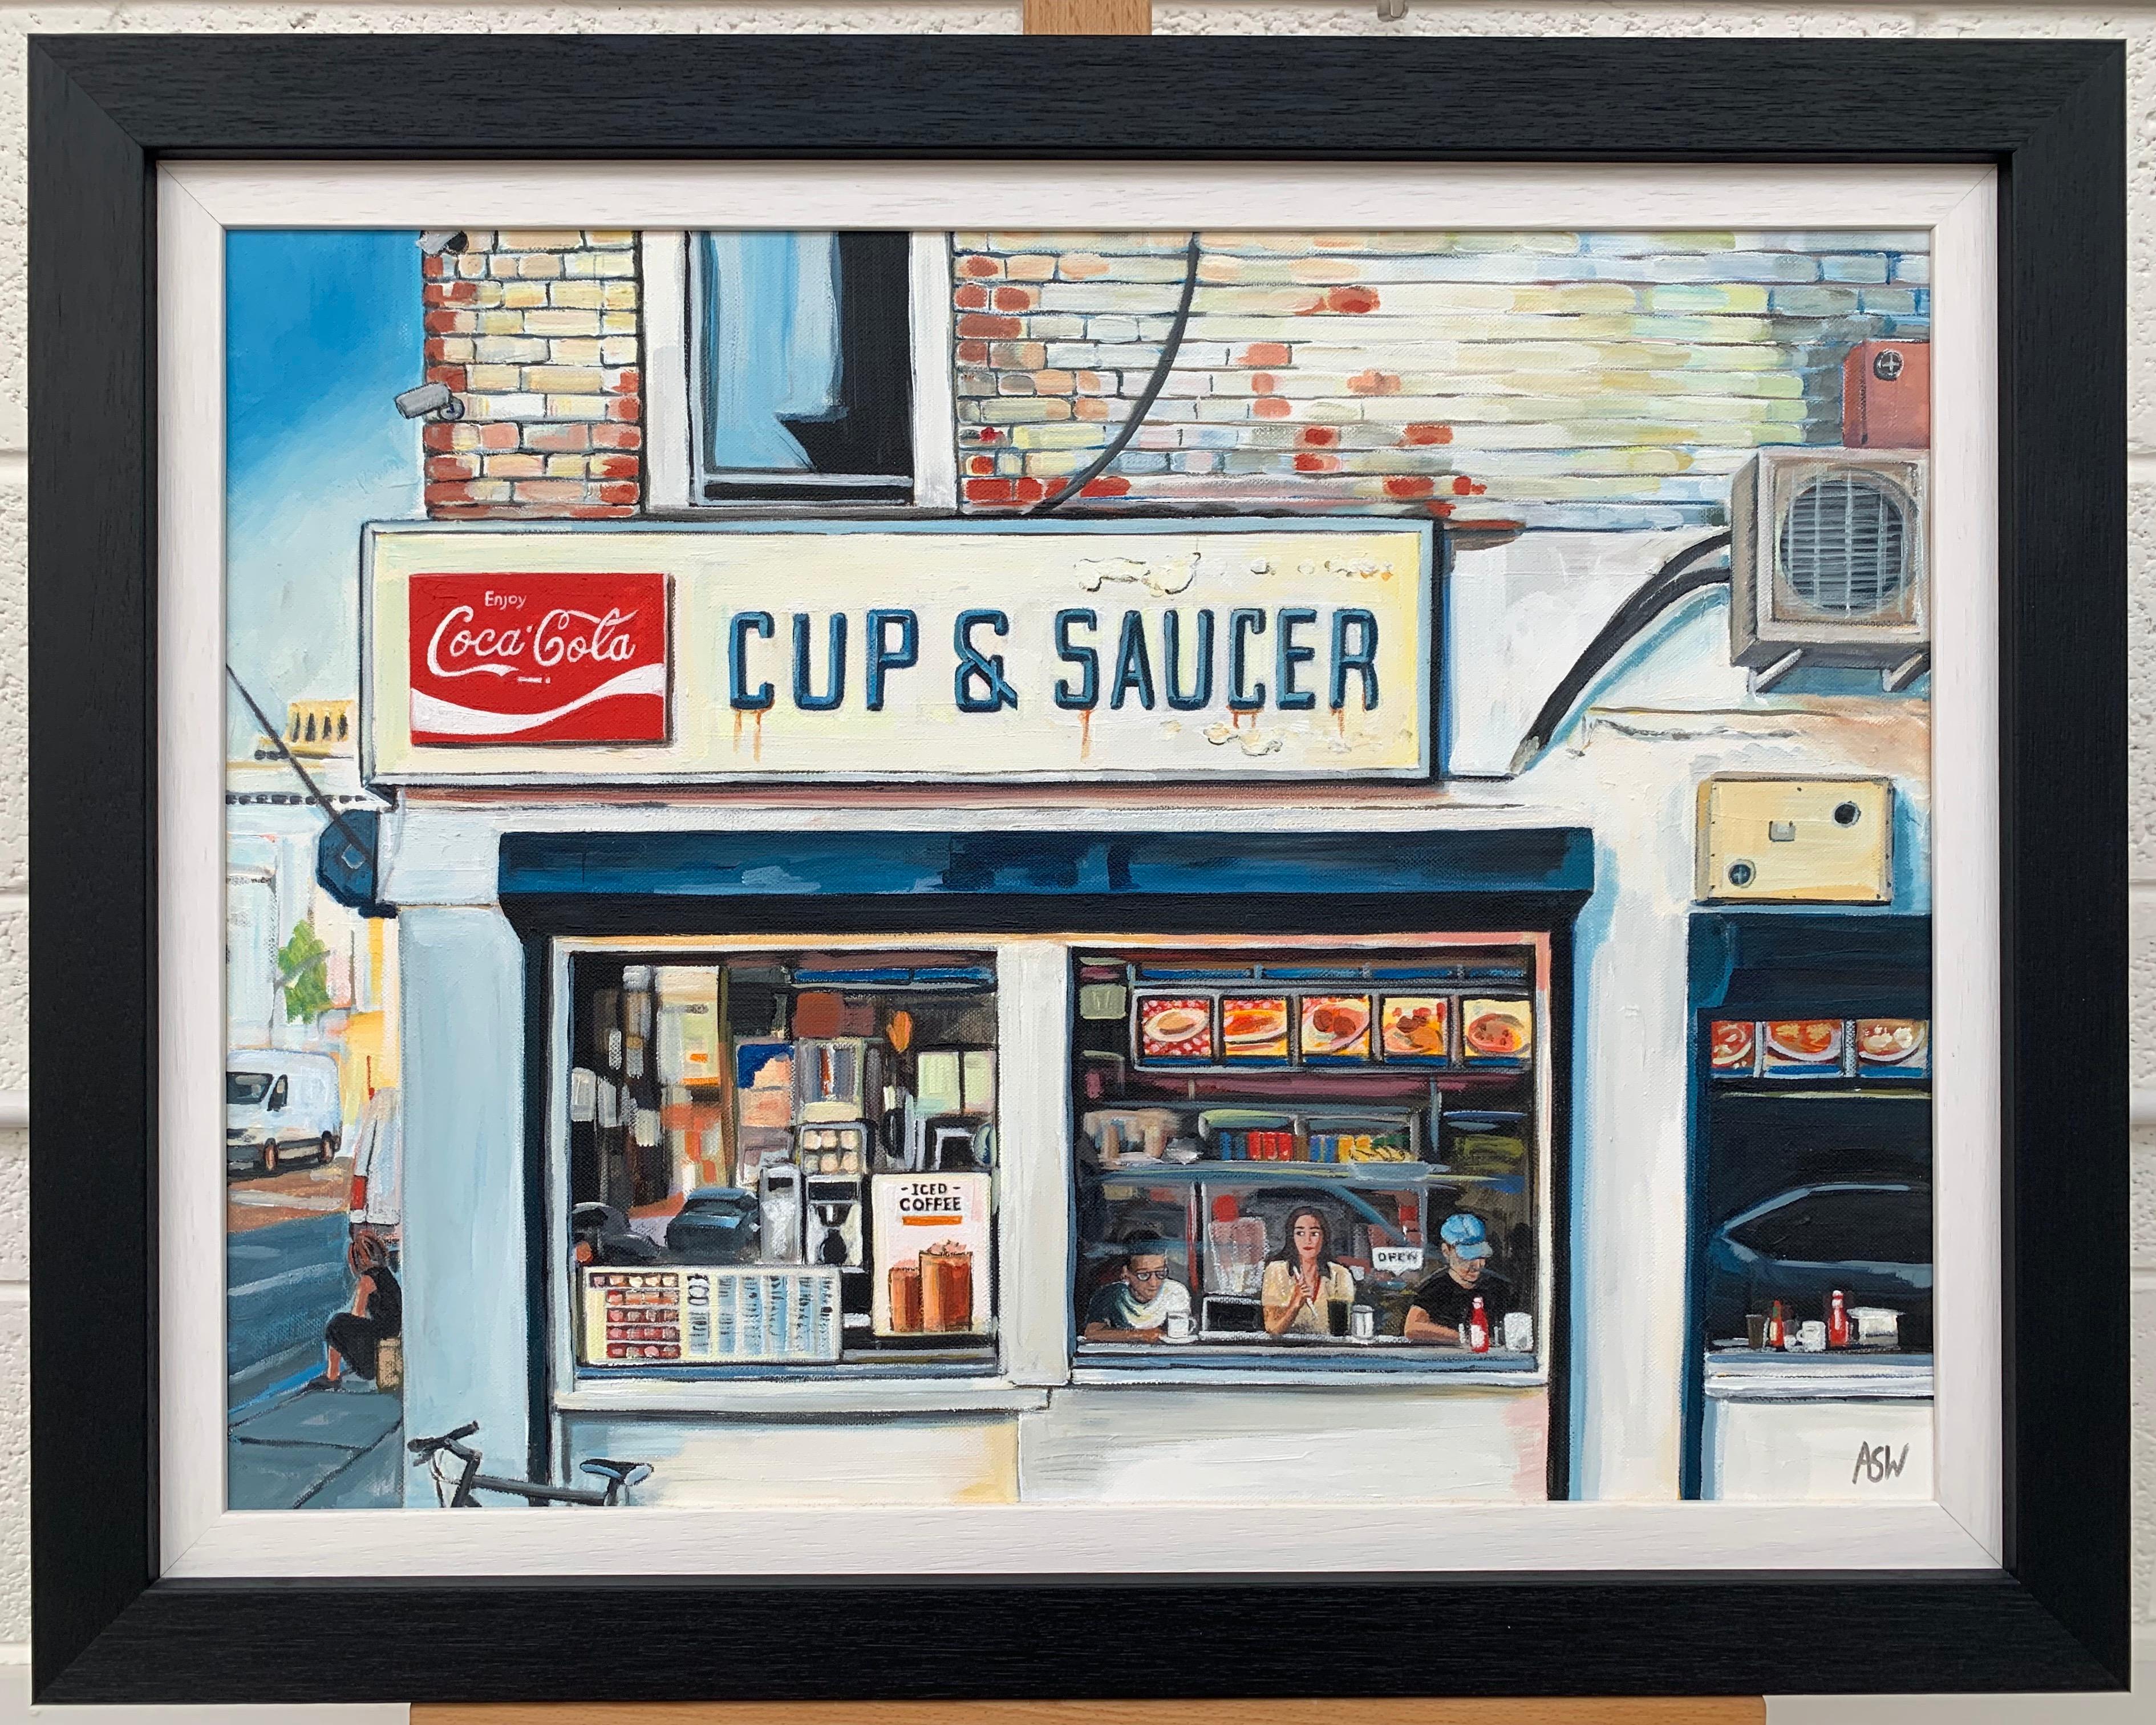 American Diner New York City Original Painting by Leading British Urban Artist - Gray Interior Painting by Angela Wakefield